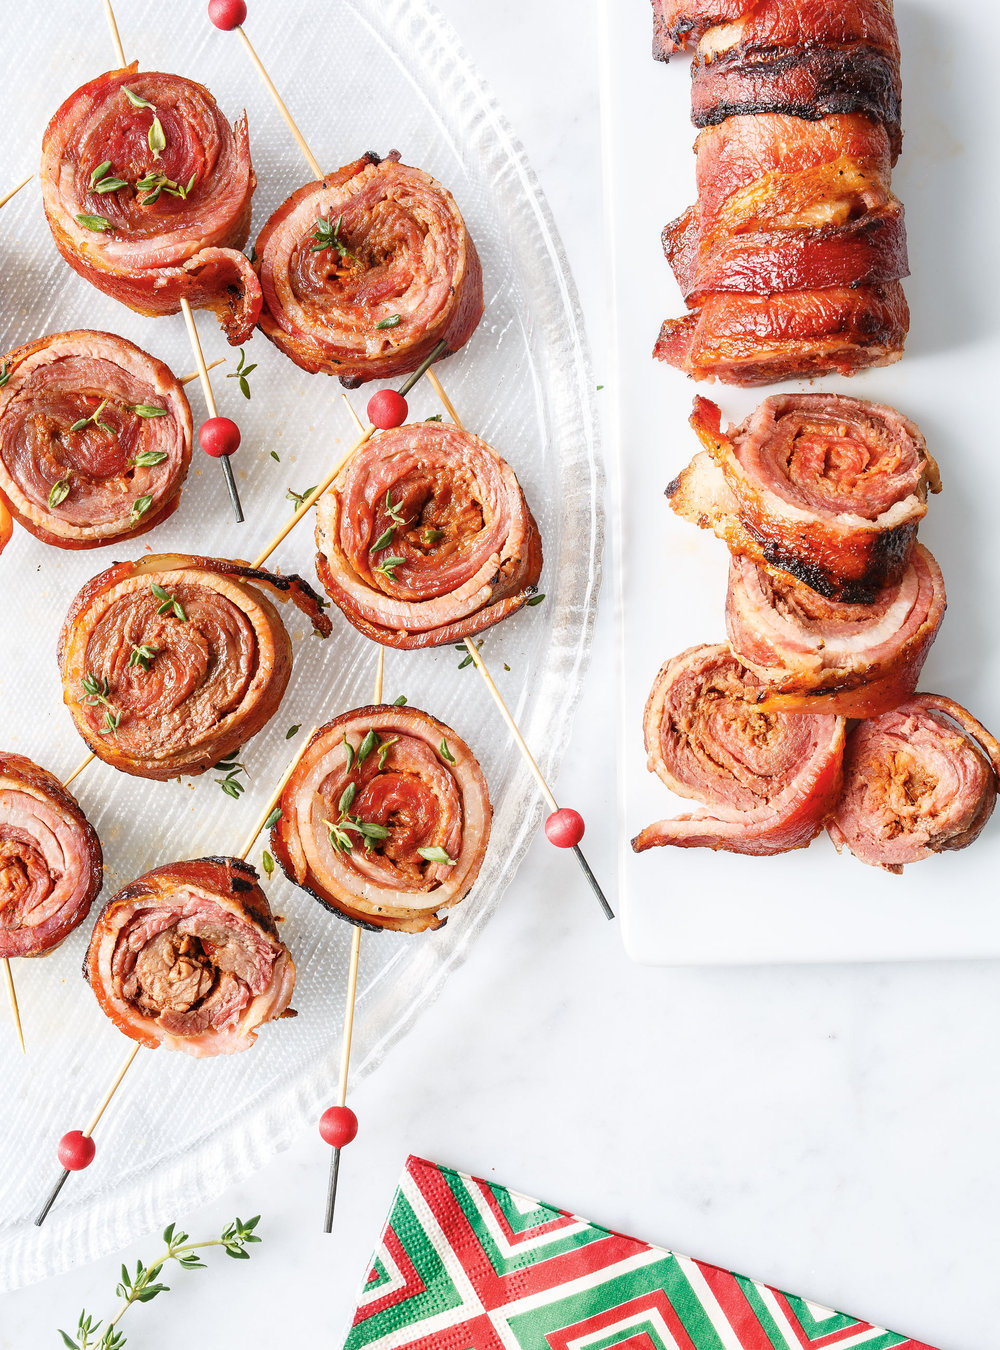 Bacon-Wrapped Tournedos Hors-d’Oeuvres